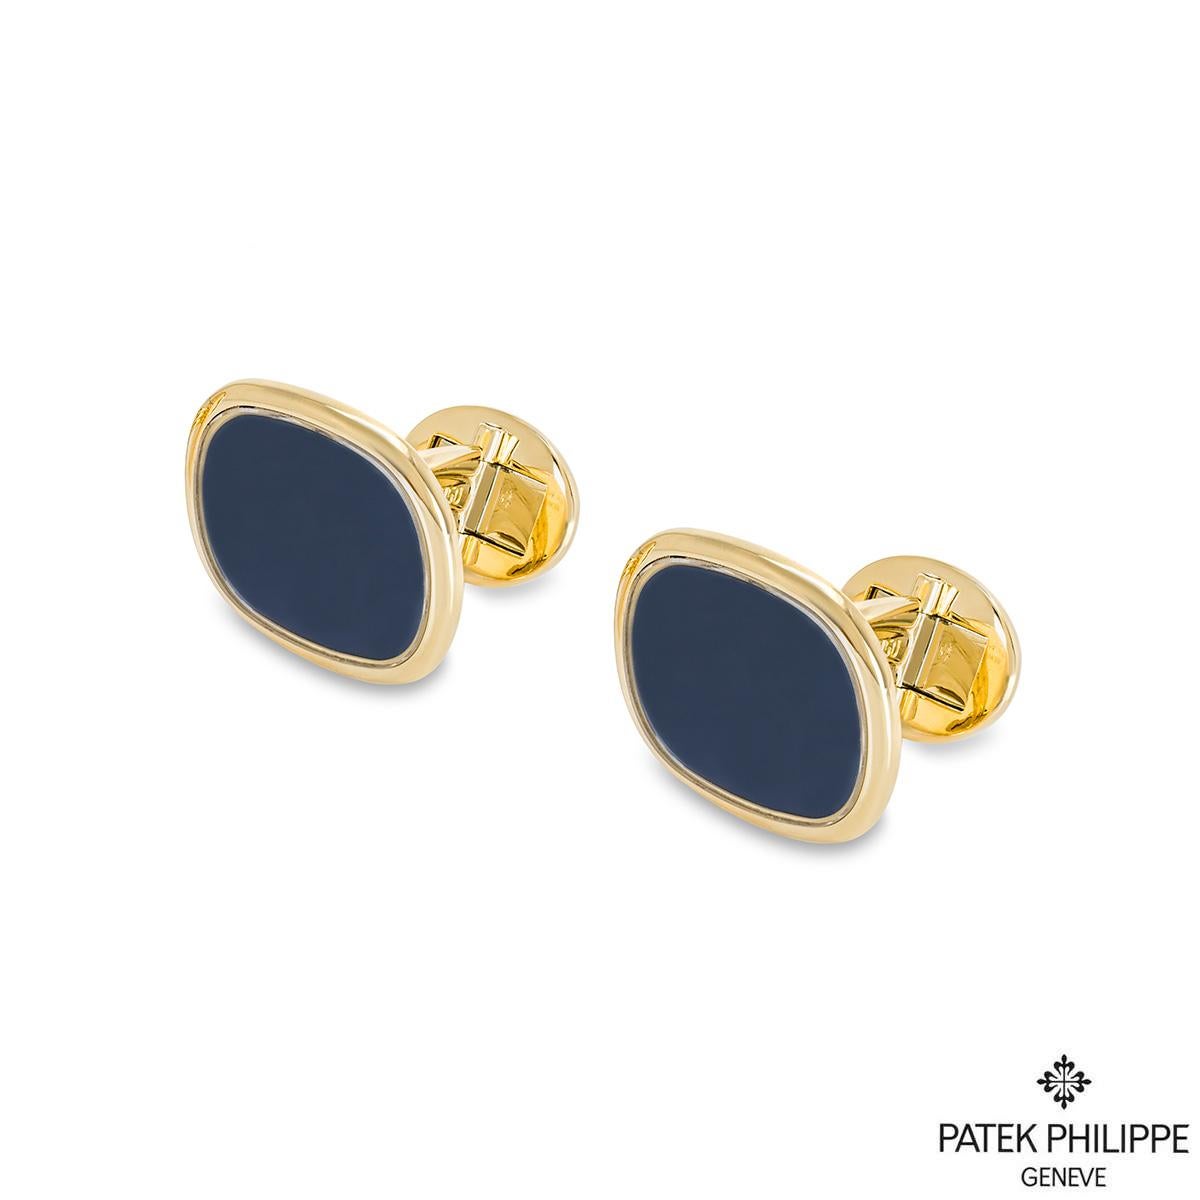 A pair of 18k yellow gold large Ellipse cufflinks by Patek Philippe. Each cufflink has a blue centre surrounded by yellow gold. Measuring 19mm in height and 22mm in width. The cufflinks have T-bar fittings and have a gross weight of 25.9 grams.

The